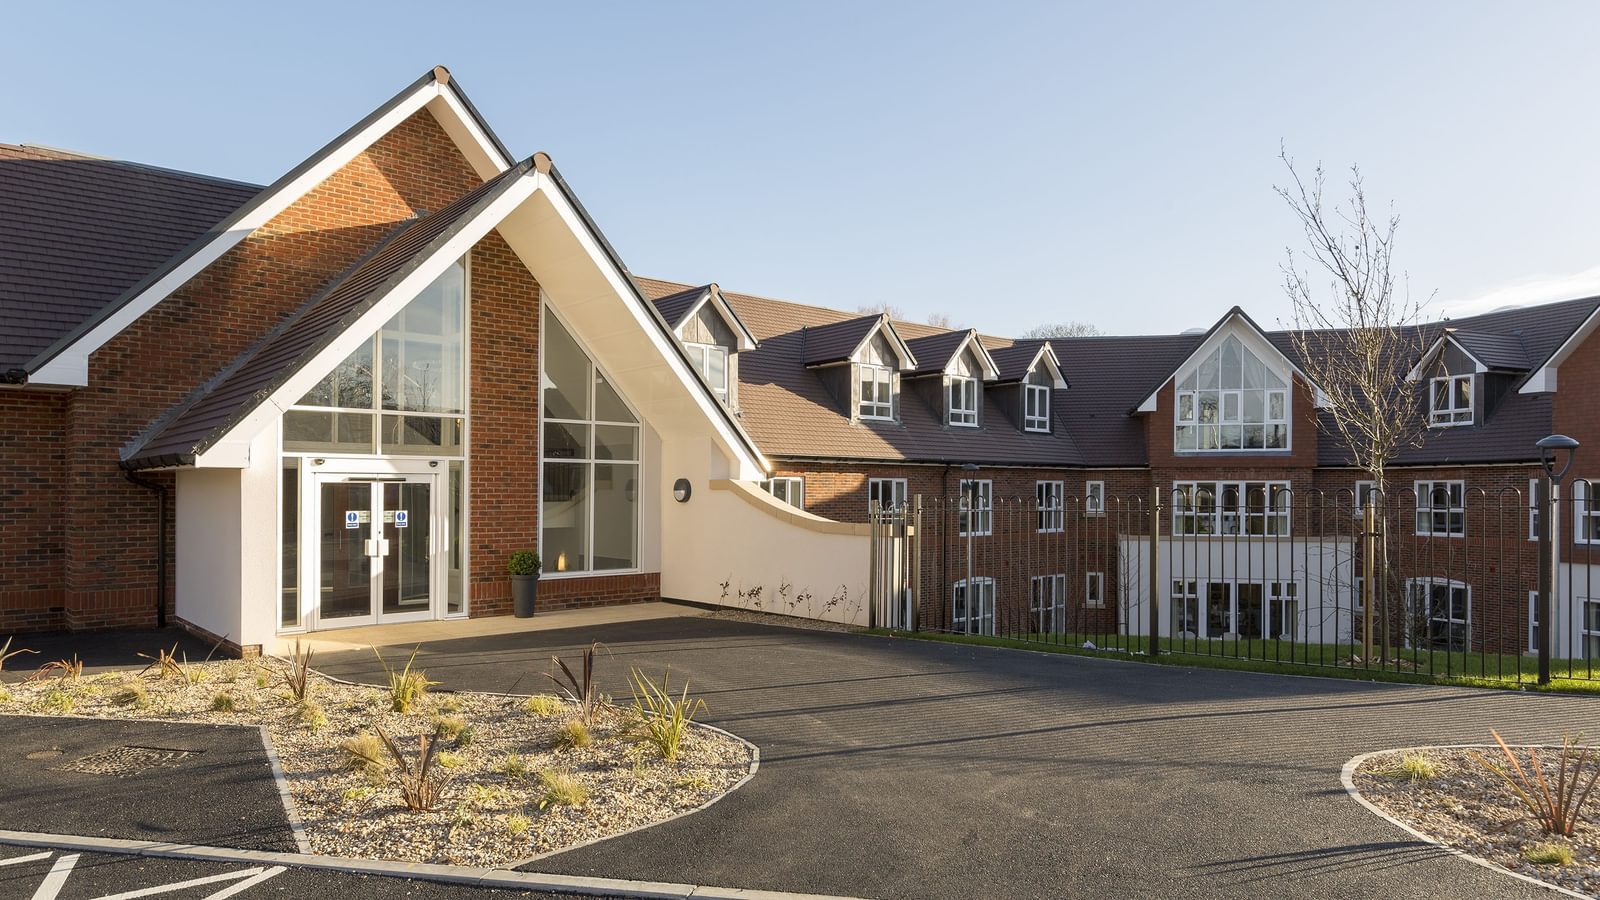 Exterior of Blenheim Court Care Home in Liss with doors to reception